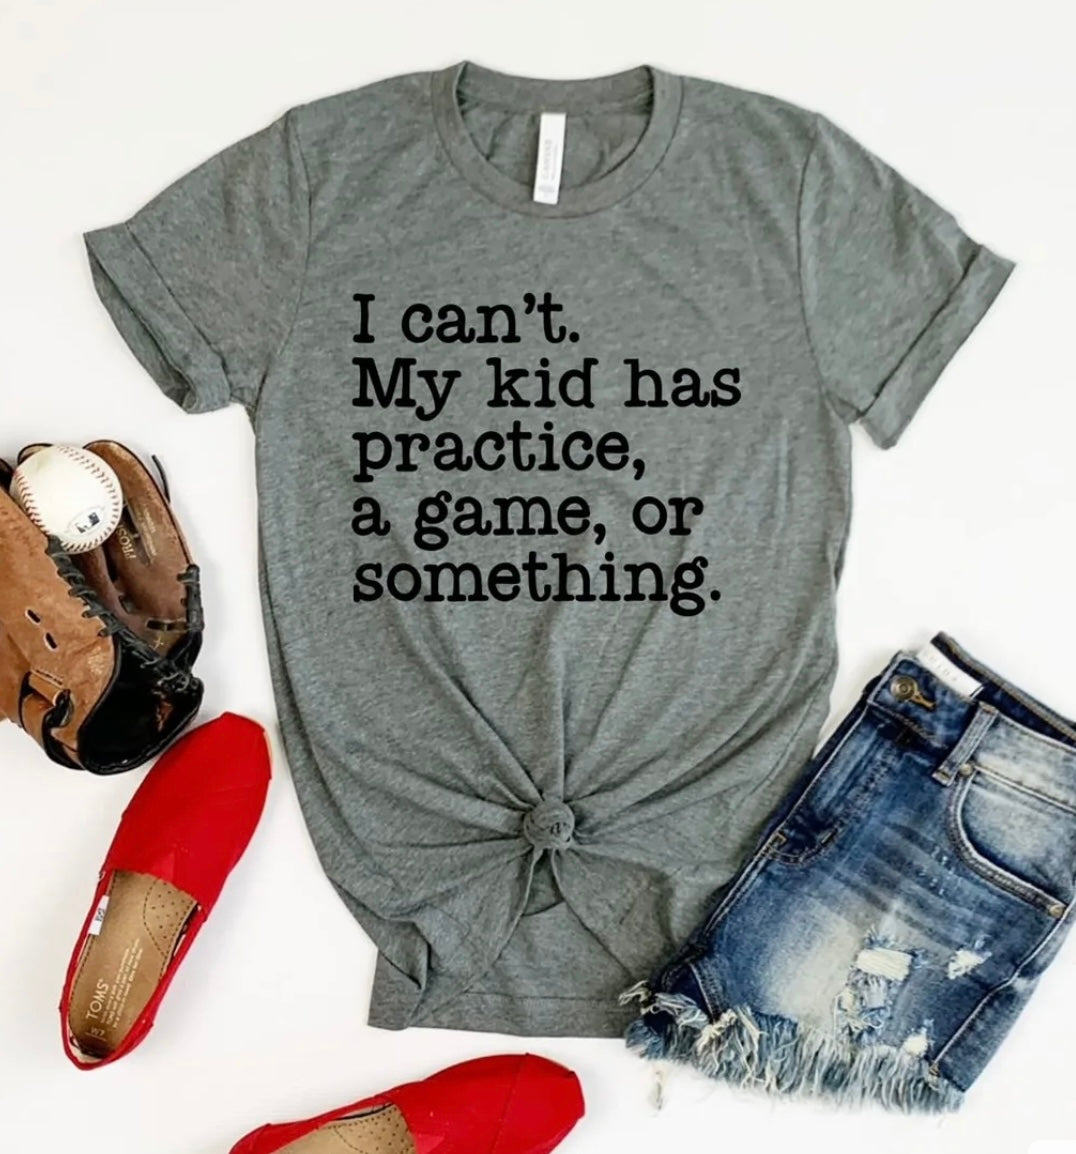 I can't my kid has practice shirt